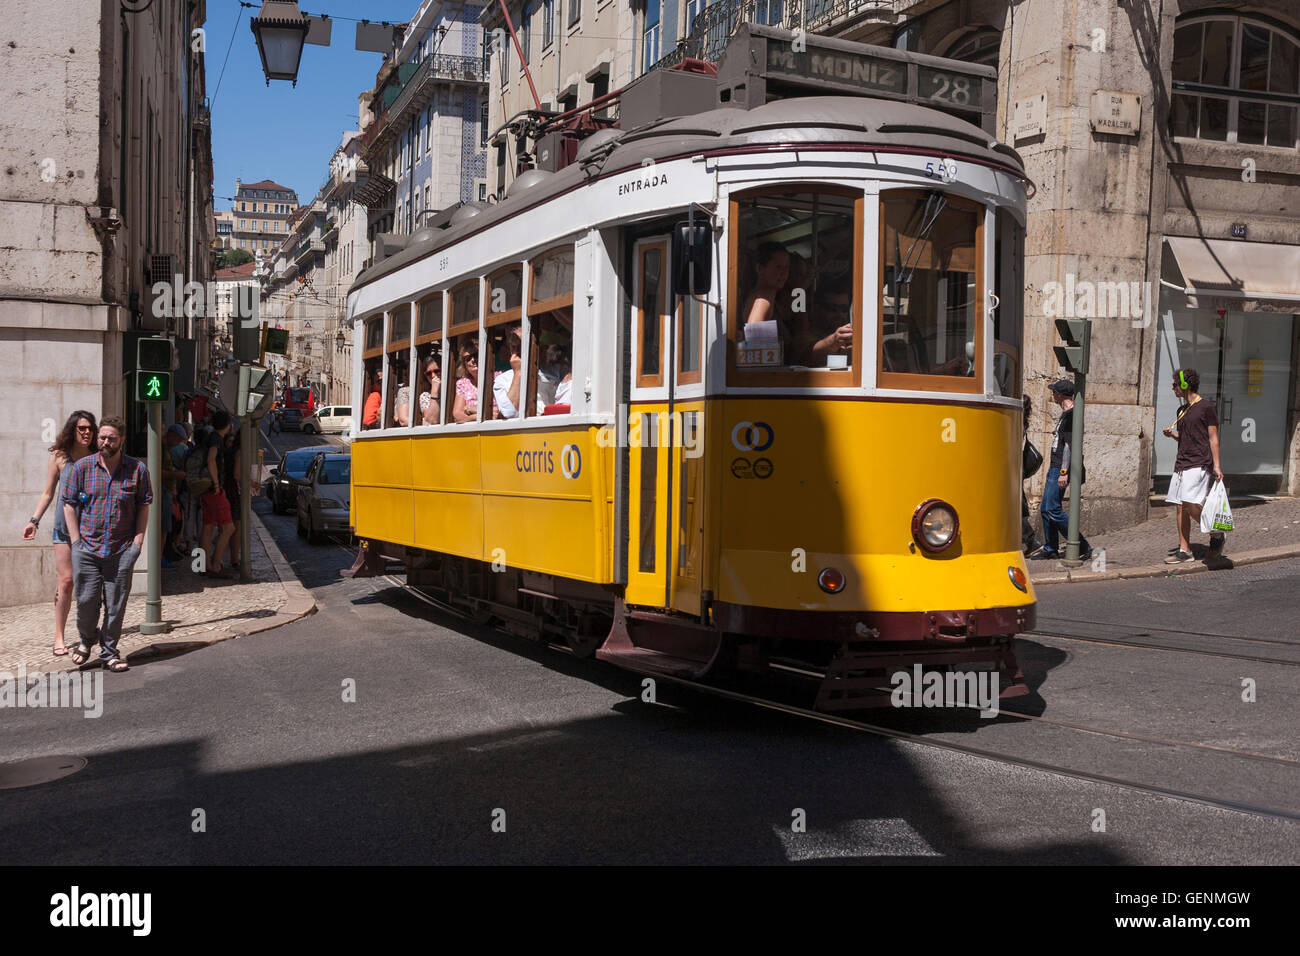 The famous number 28 tram route, mid-route near Praca do Commercio, in Lisbon, Portugal. Stock Photo